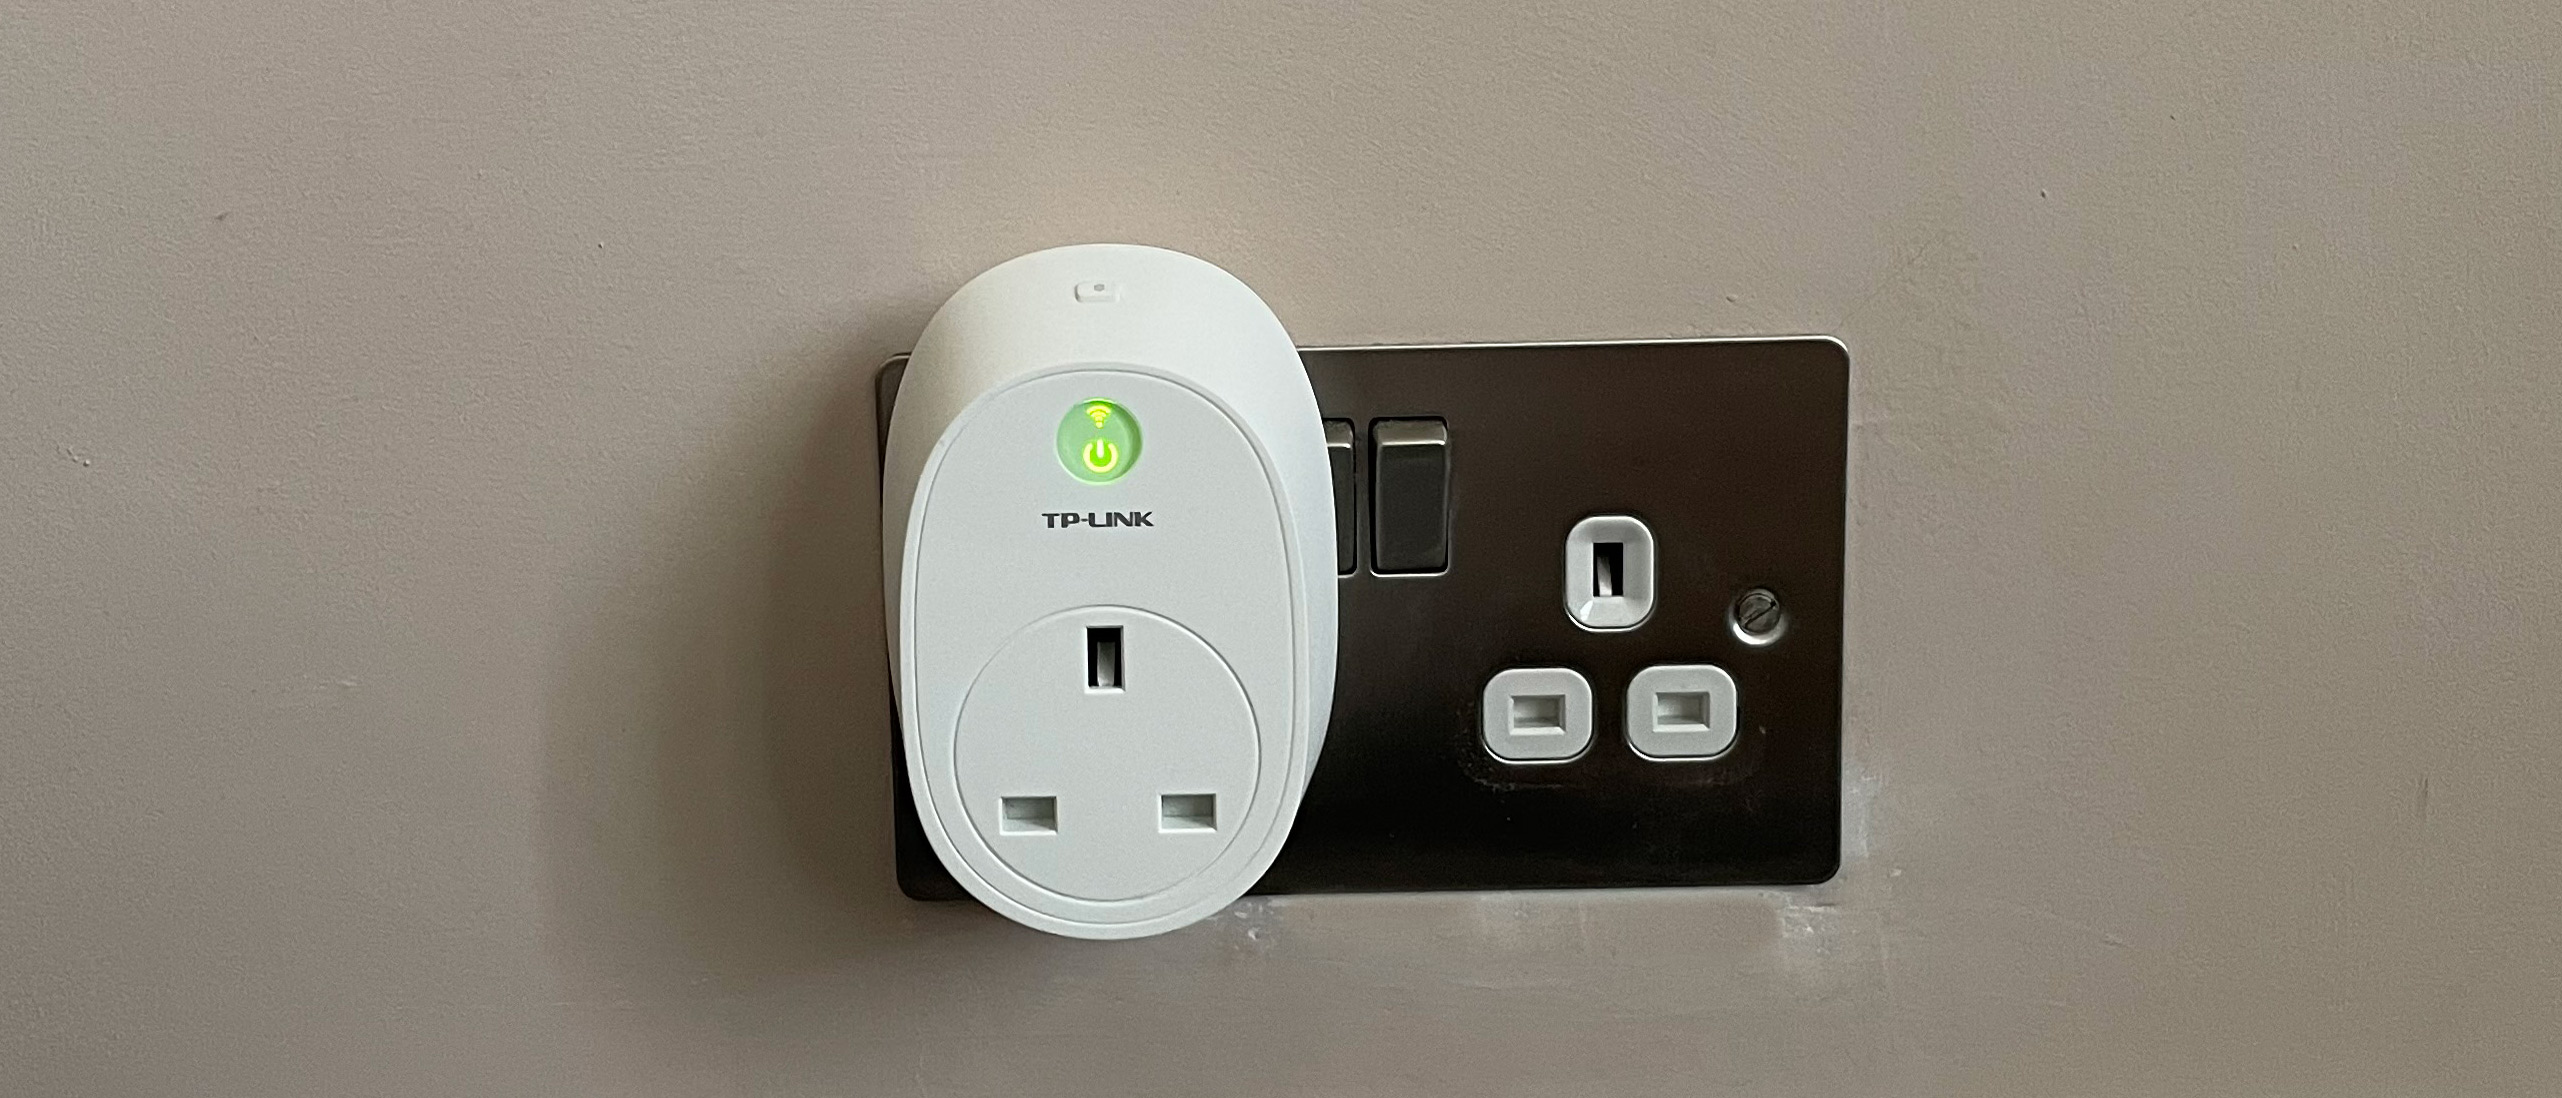 Kasa smart plug review: This energy monitoring plug is great - Reviewed